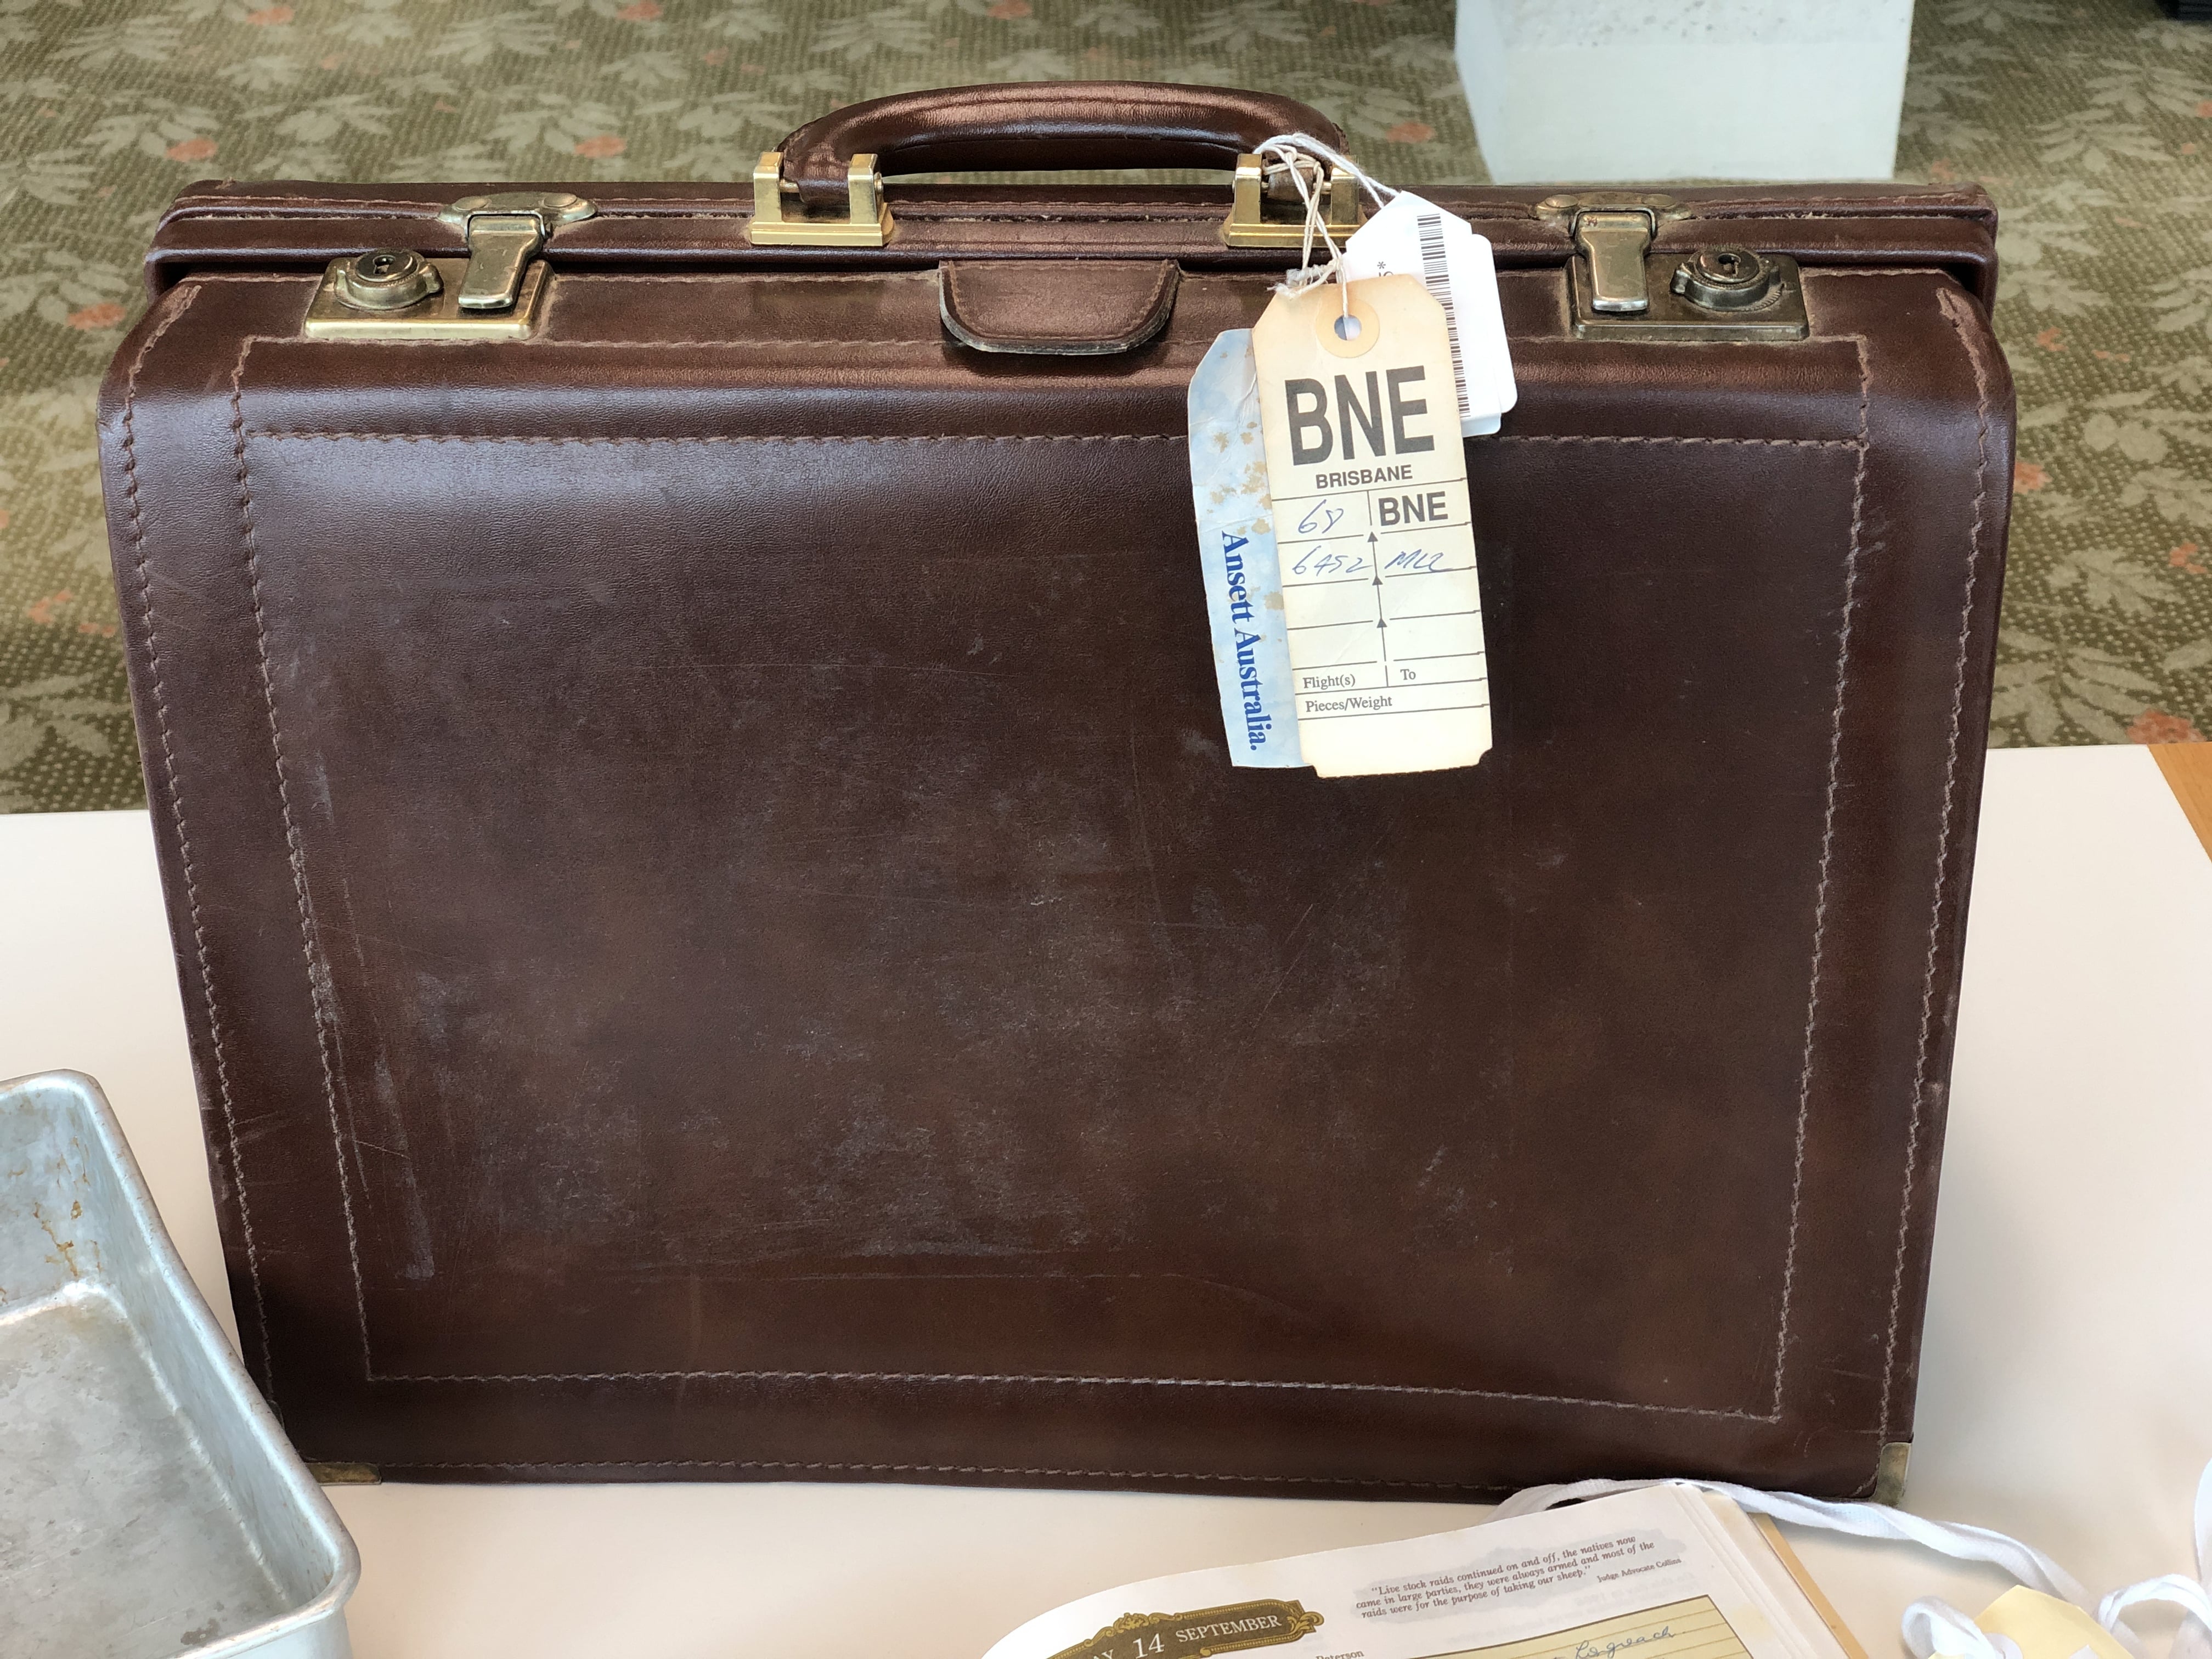 Leather briefcase used by Sir Joh that still contains an original luggage label.